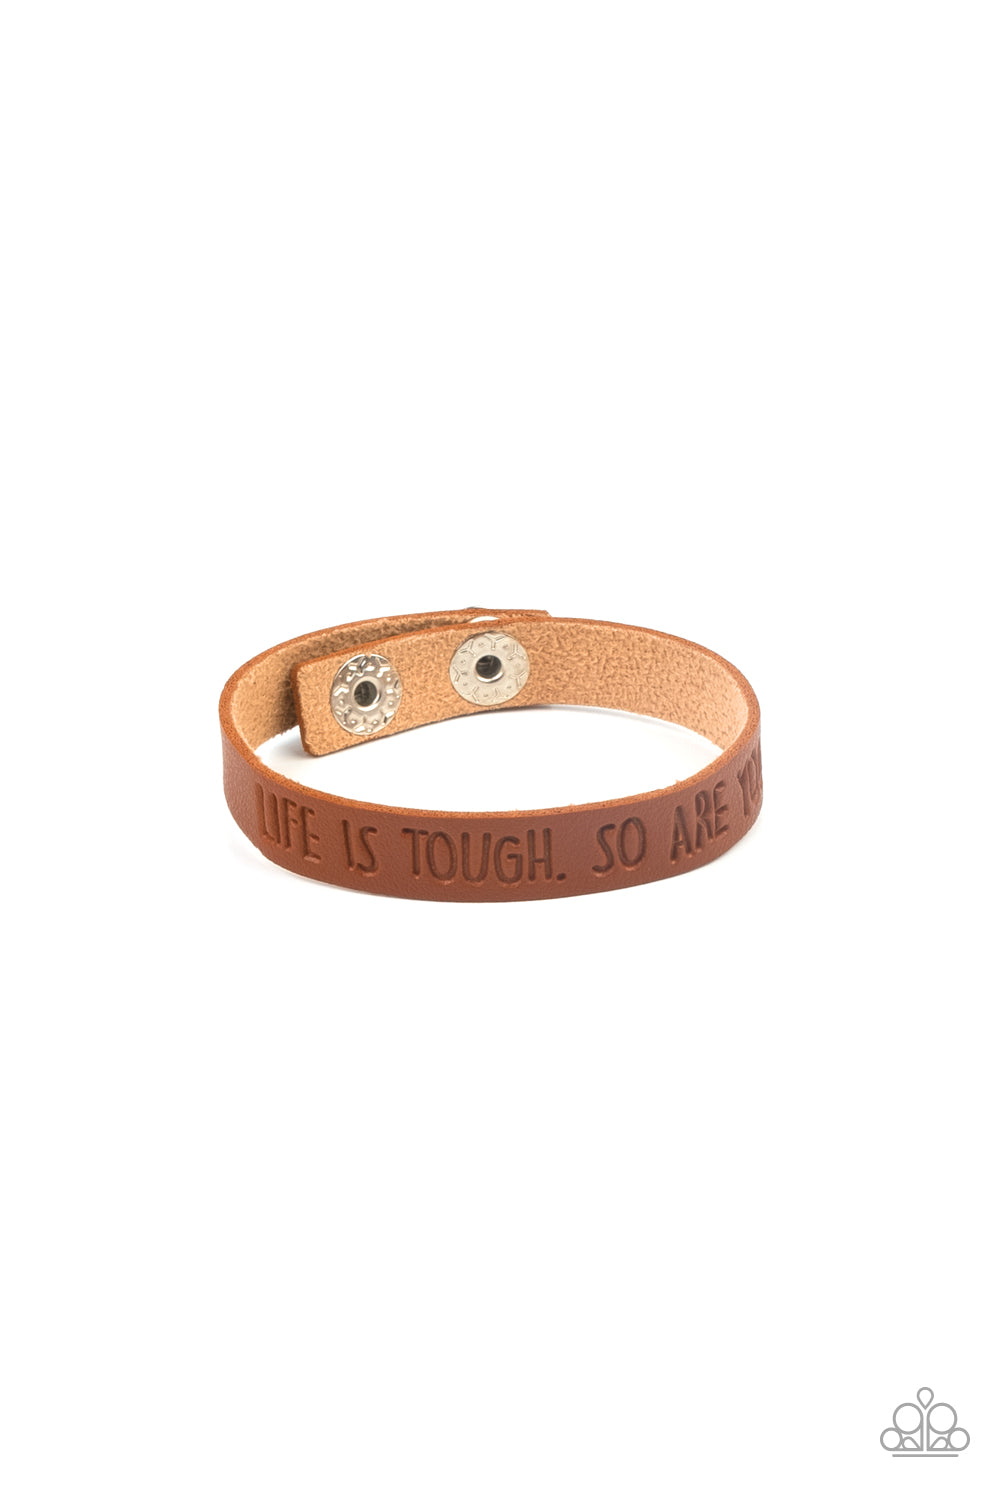 Paparazzi Life is Tough - Brown Bracelet - A Finishing Touch Jewelry